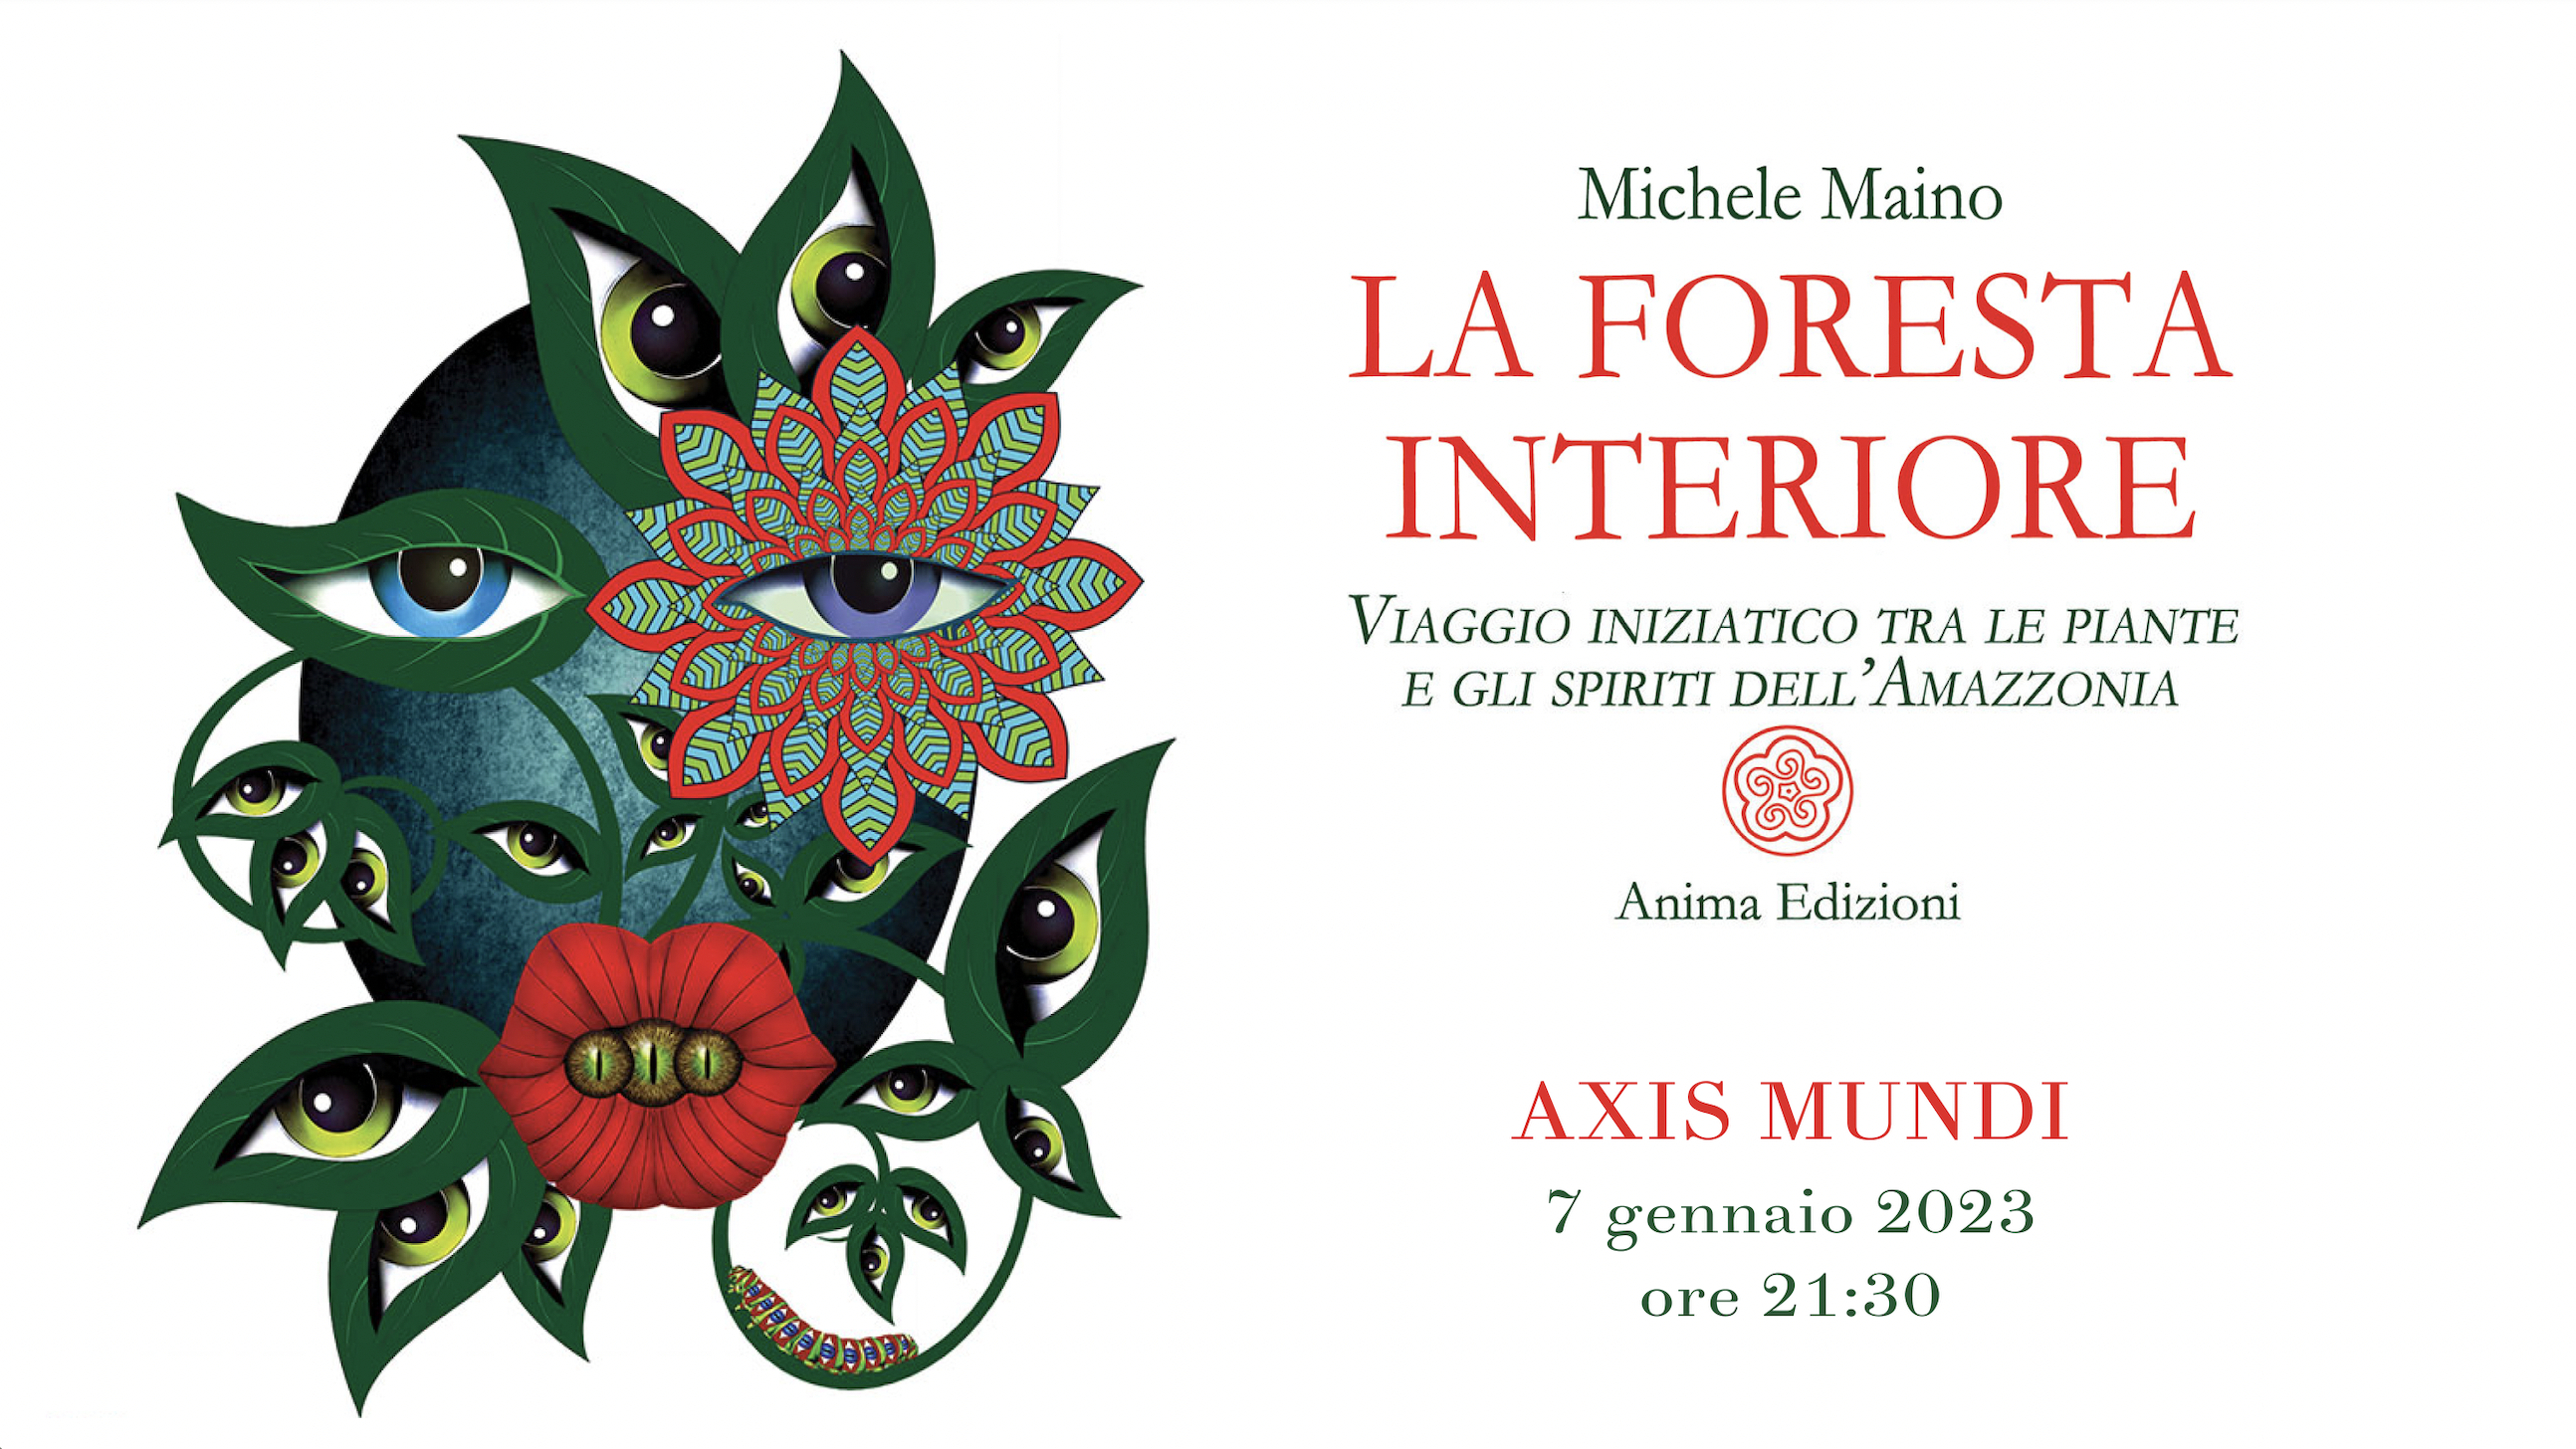 Live video: "The inner forest" - Plants and spirits of the Amazon, with Michele Maino